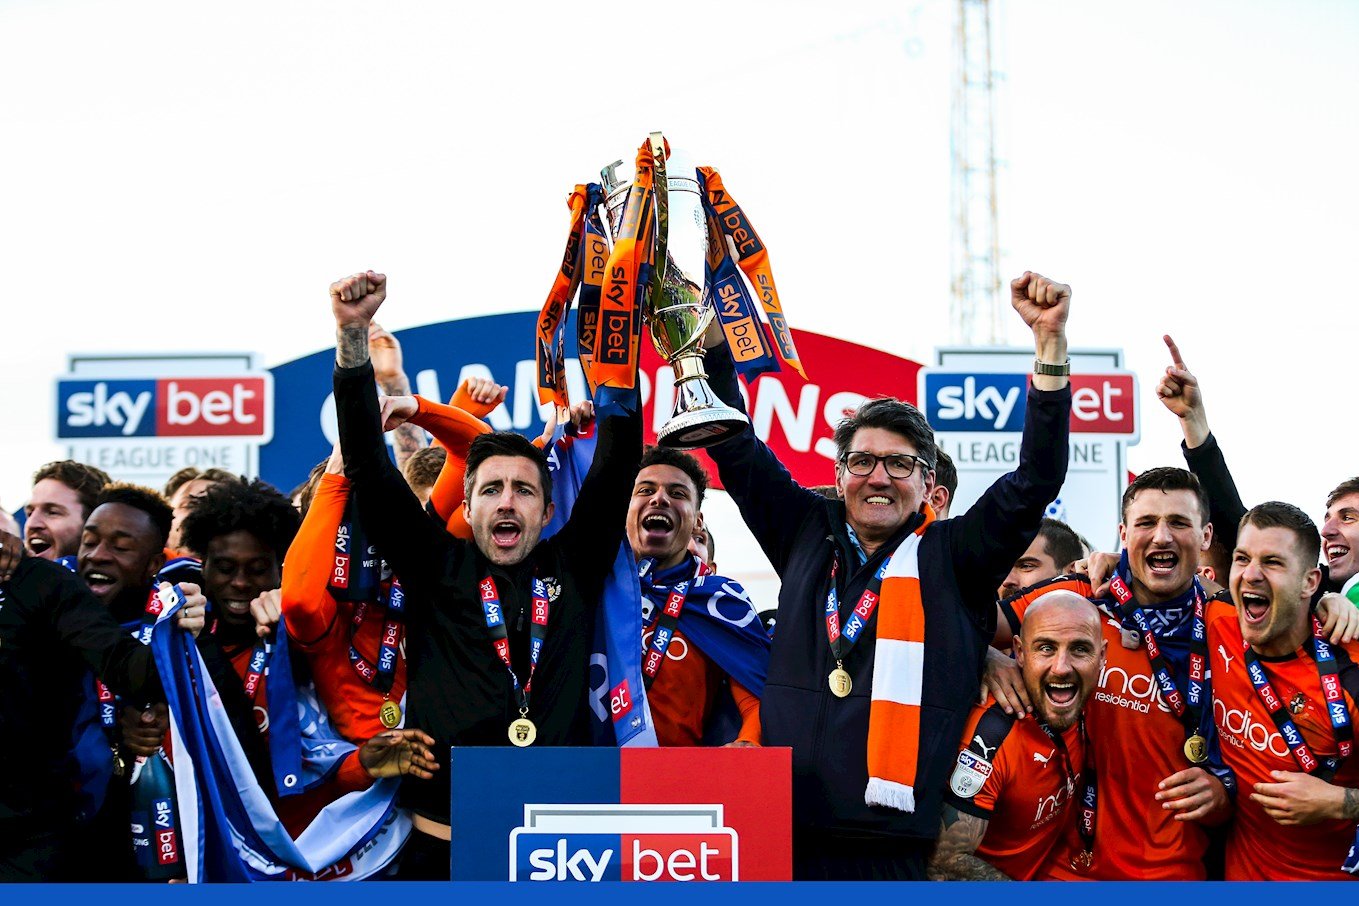 Club captain Sheehan and interim manager Mick Harford lift the League One trophy at the end of the 2018-19 season